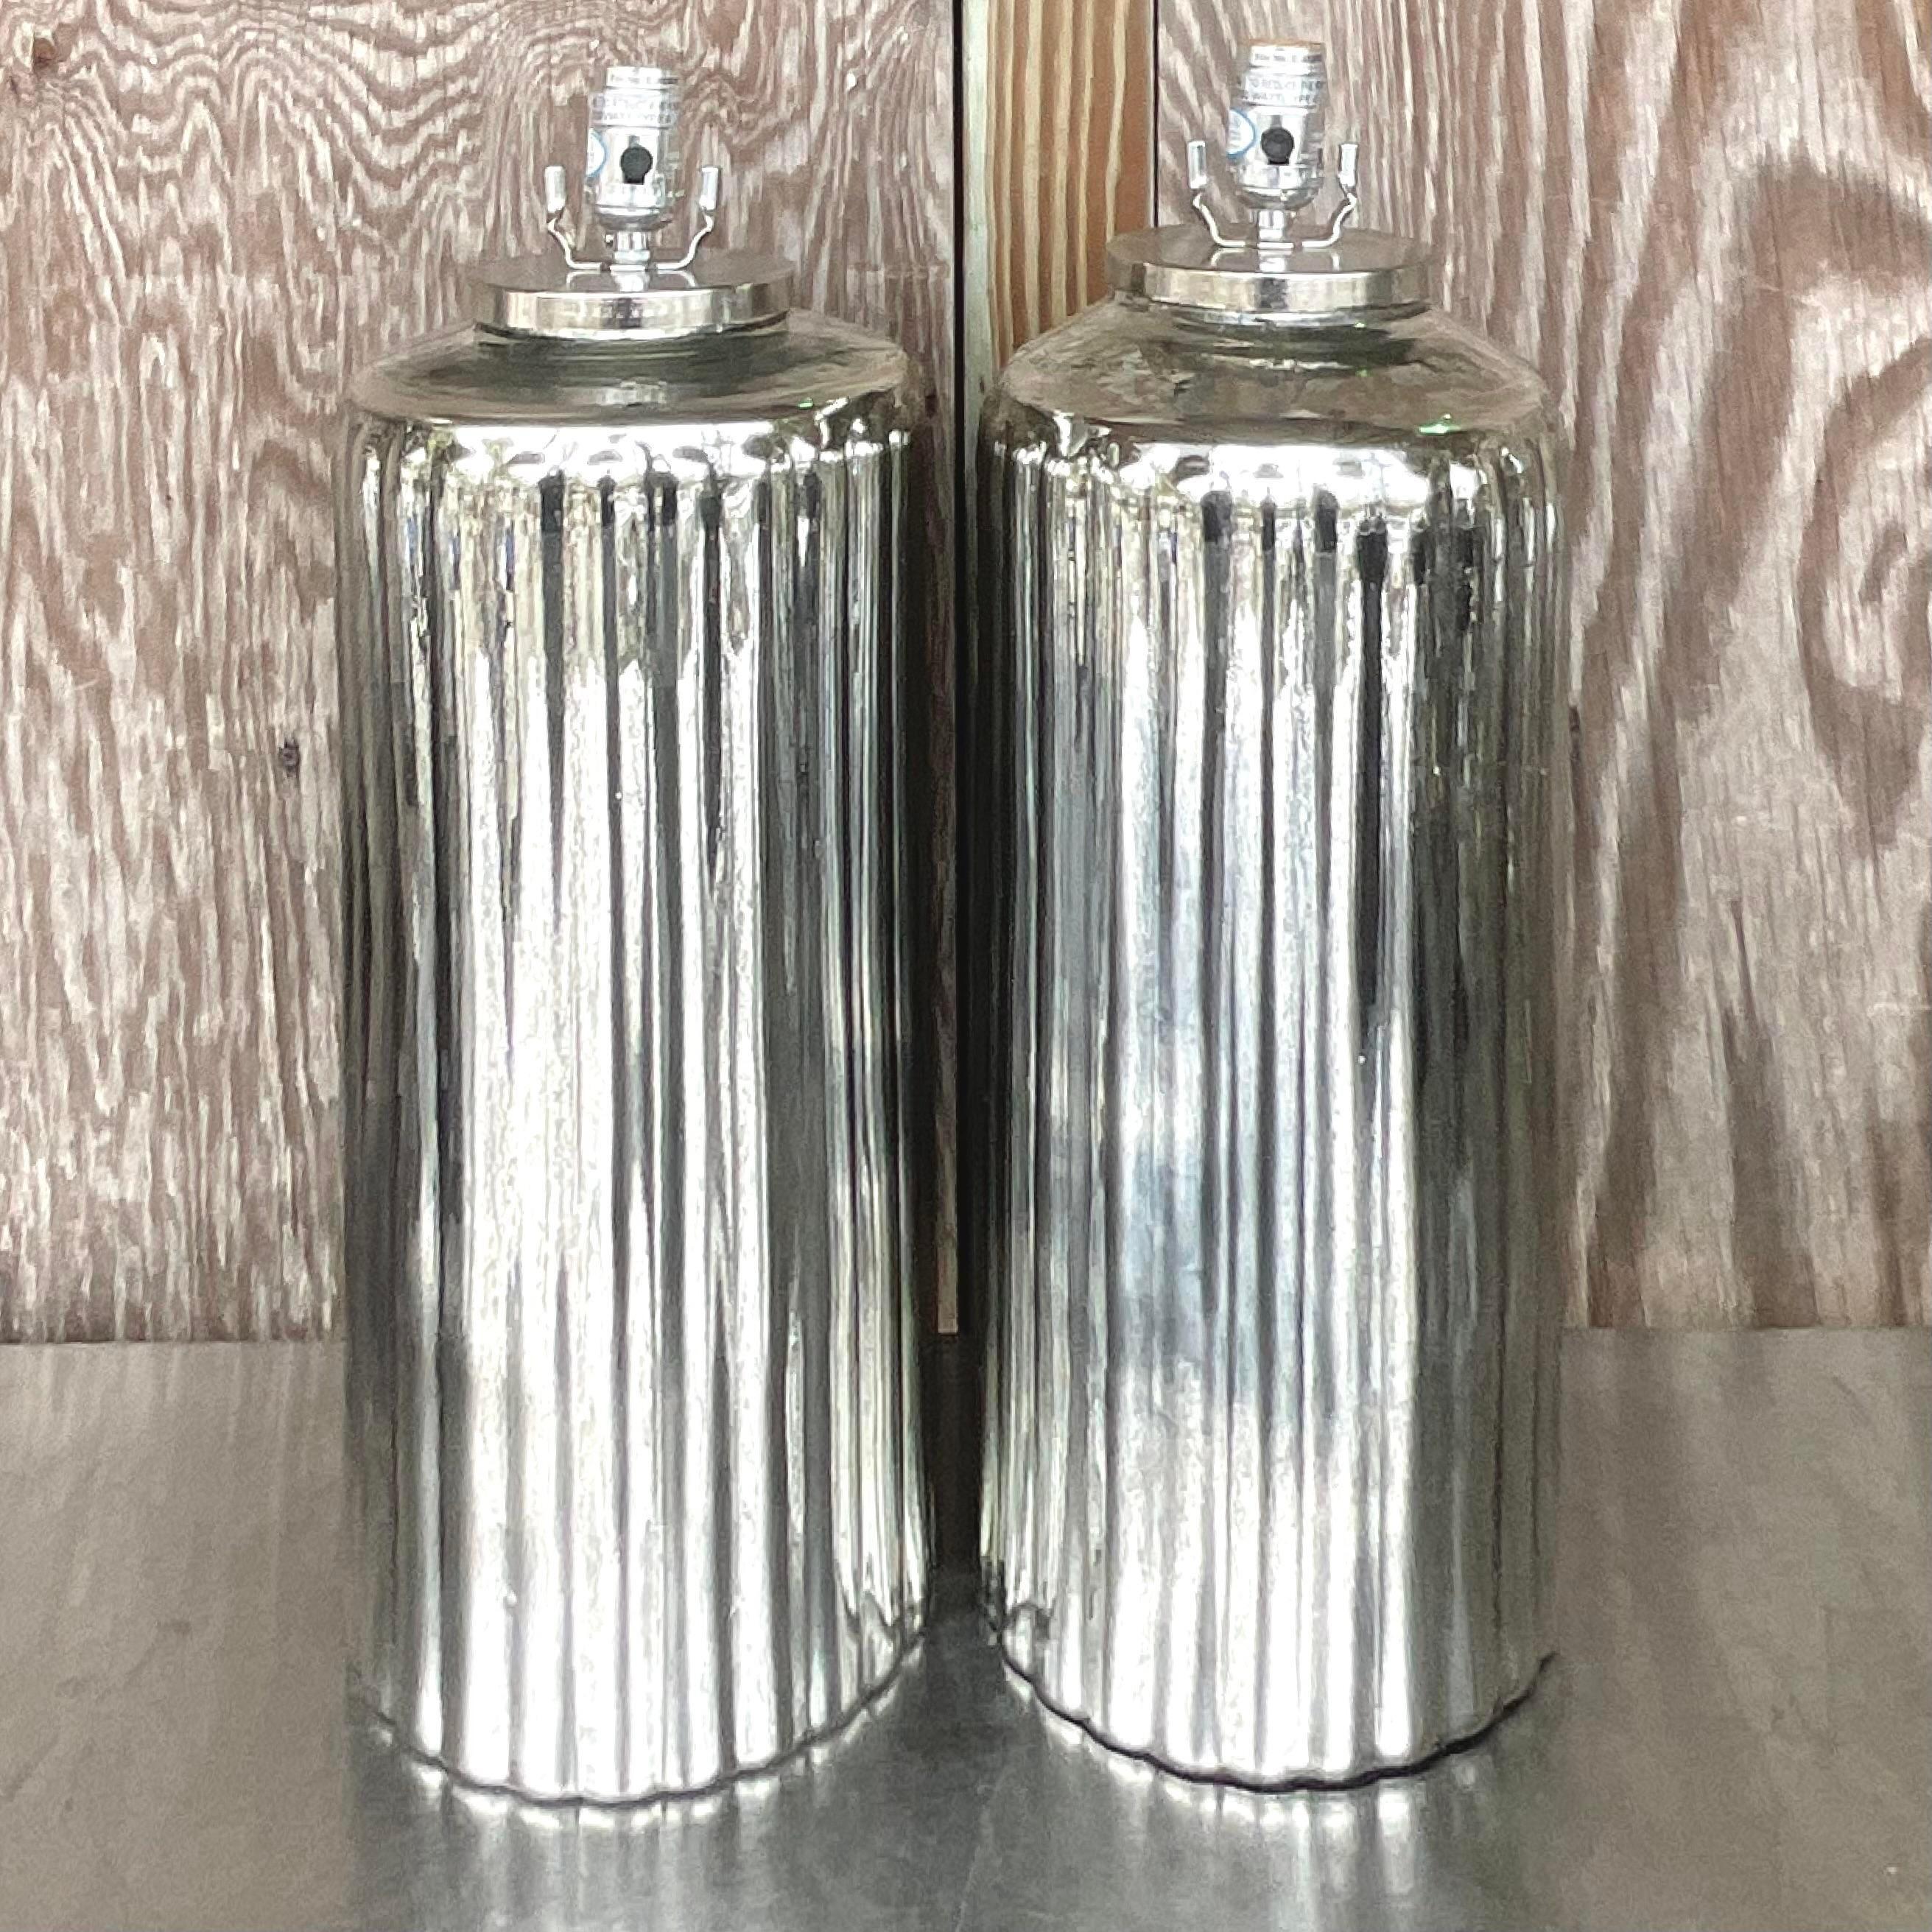 A fantastic pair of vintage Boho table lamps. A chic Mercury glass with a fabulous rippled design. Acquired from a Palm Beach estate.